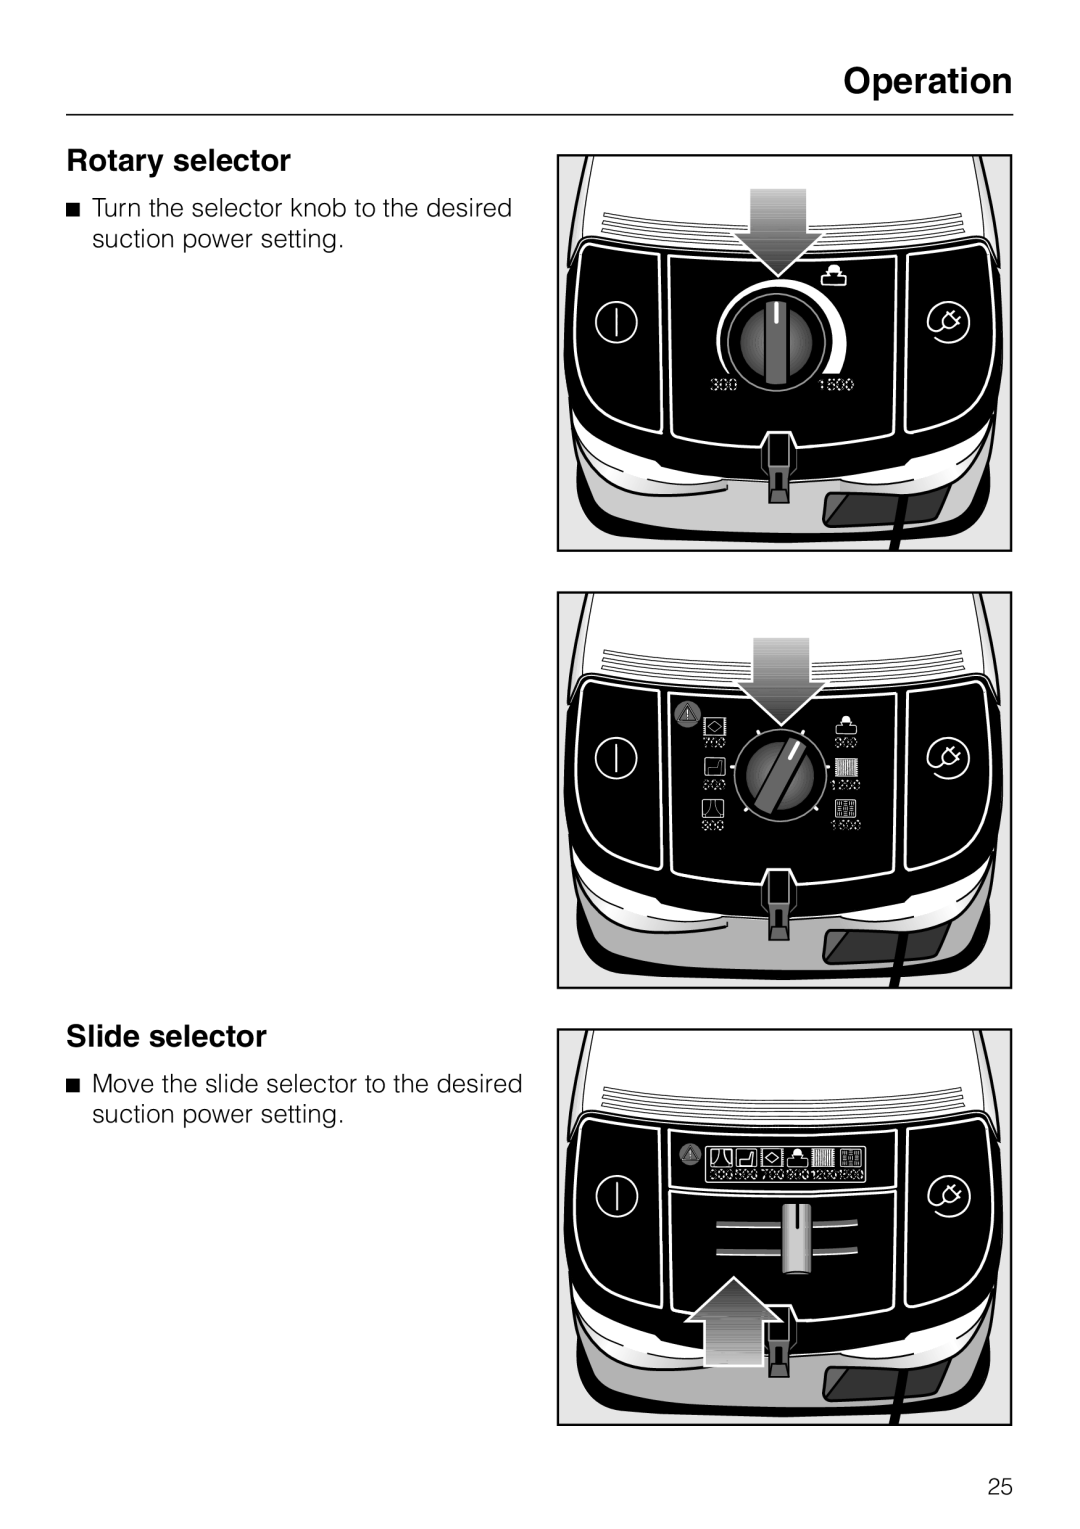 Miele S 648, S 600, S 548, S 500 operating instructions Operation, Rotary selector, Slide selector 